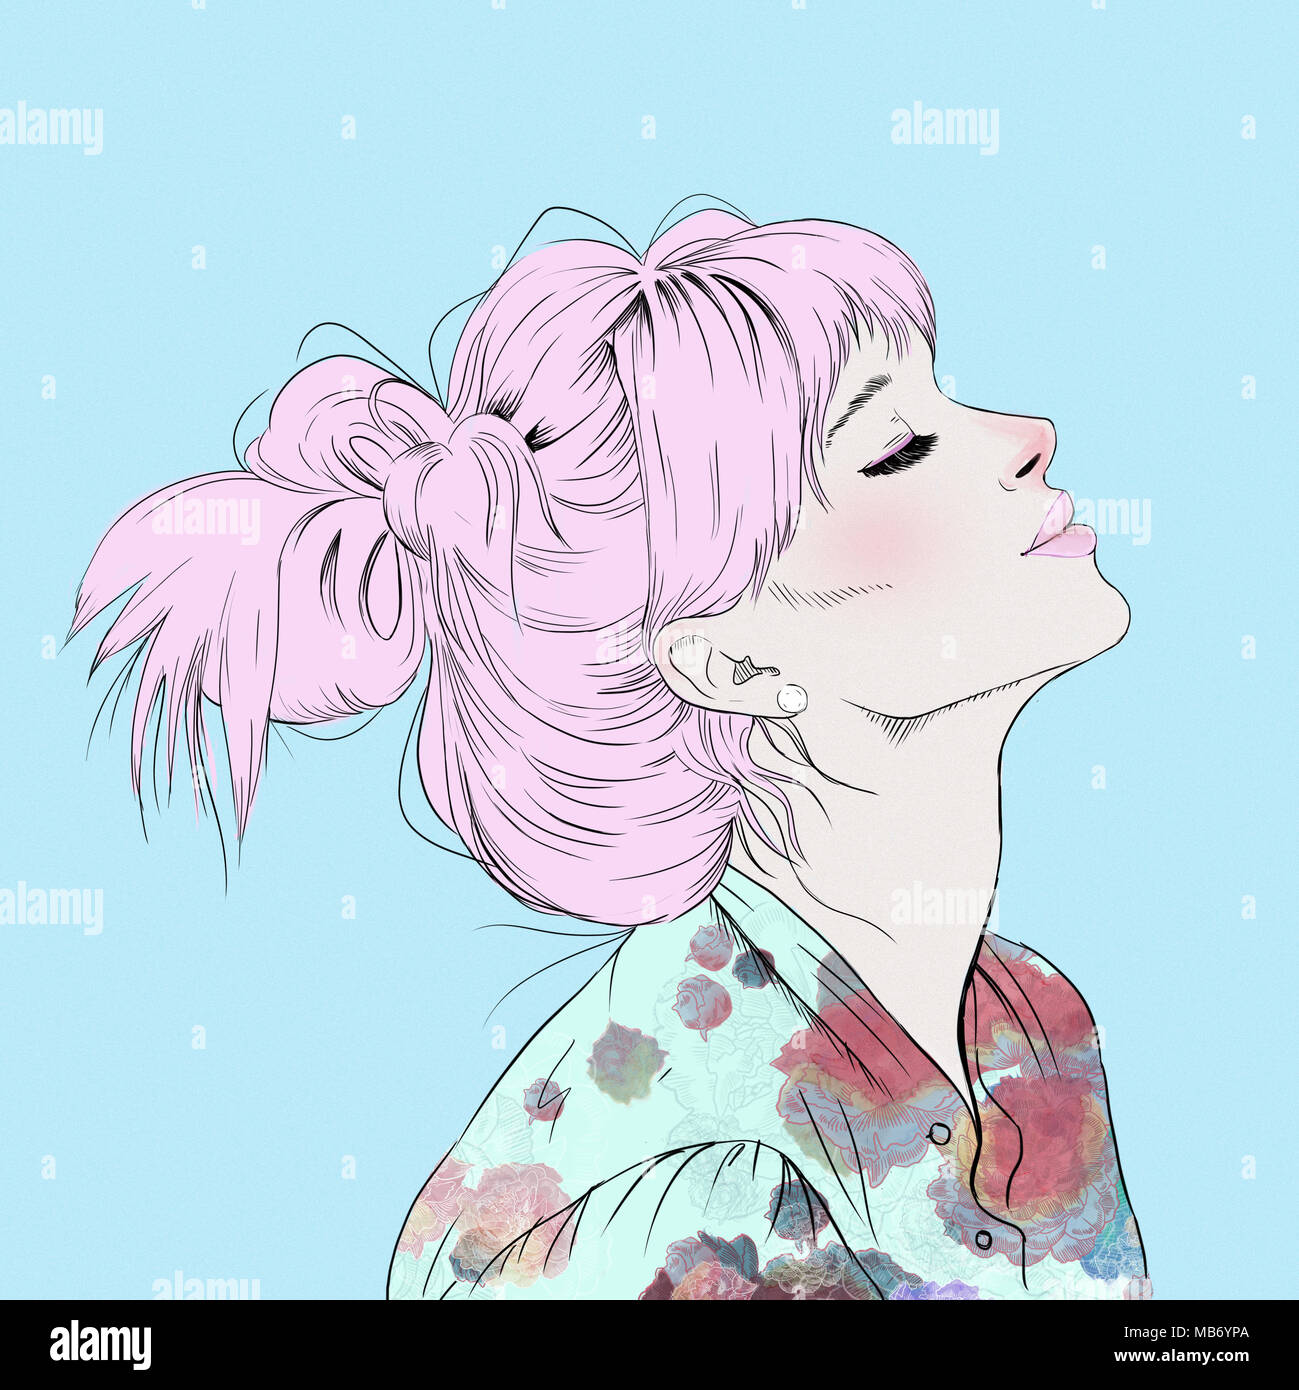 Profile illustration of a beautiful girl with pink hair Stock Photo